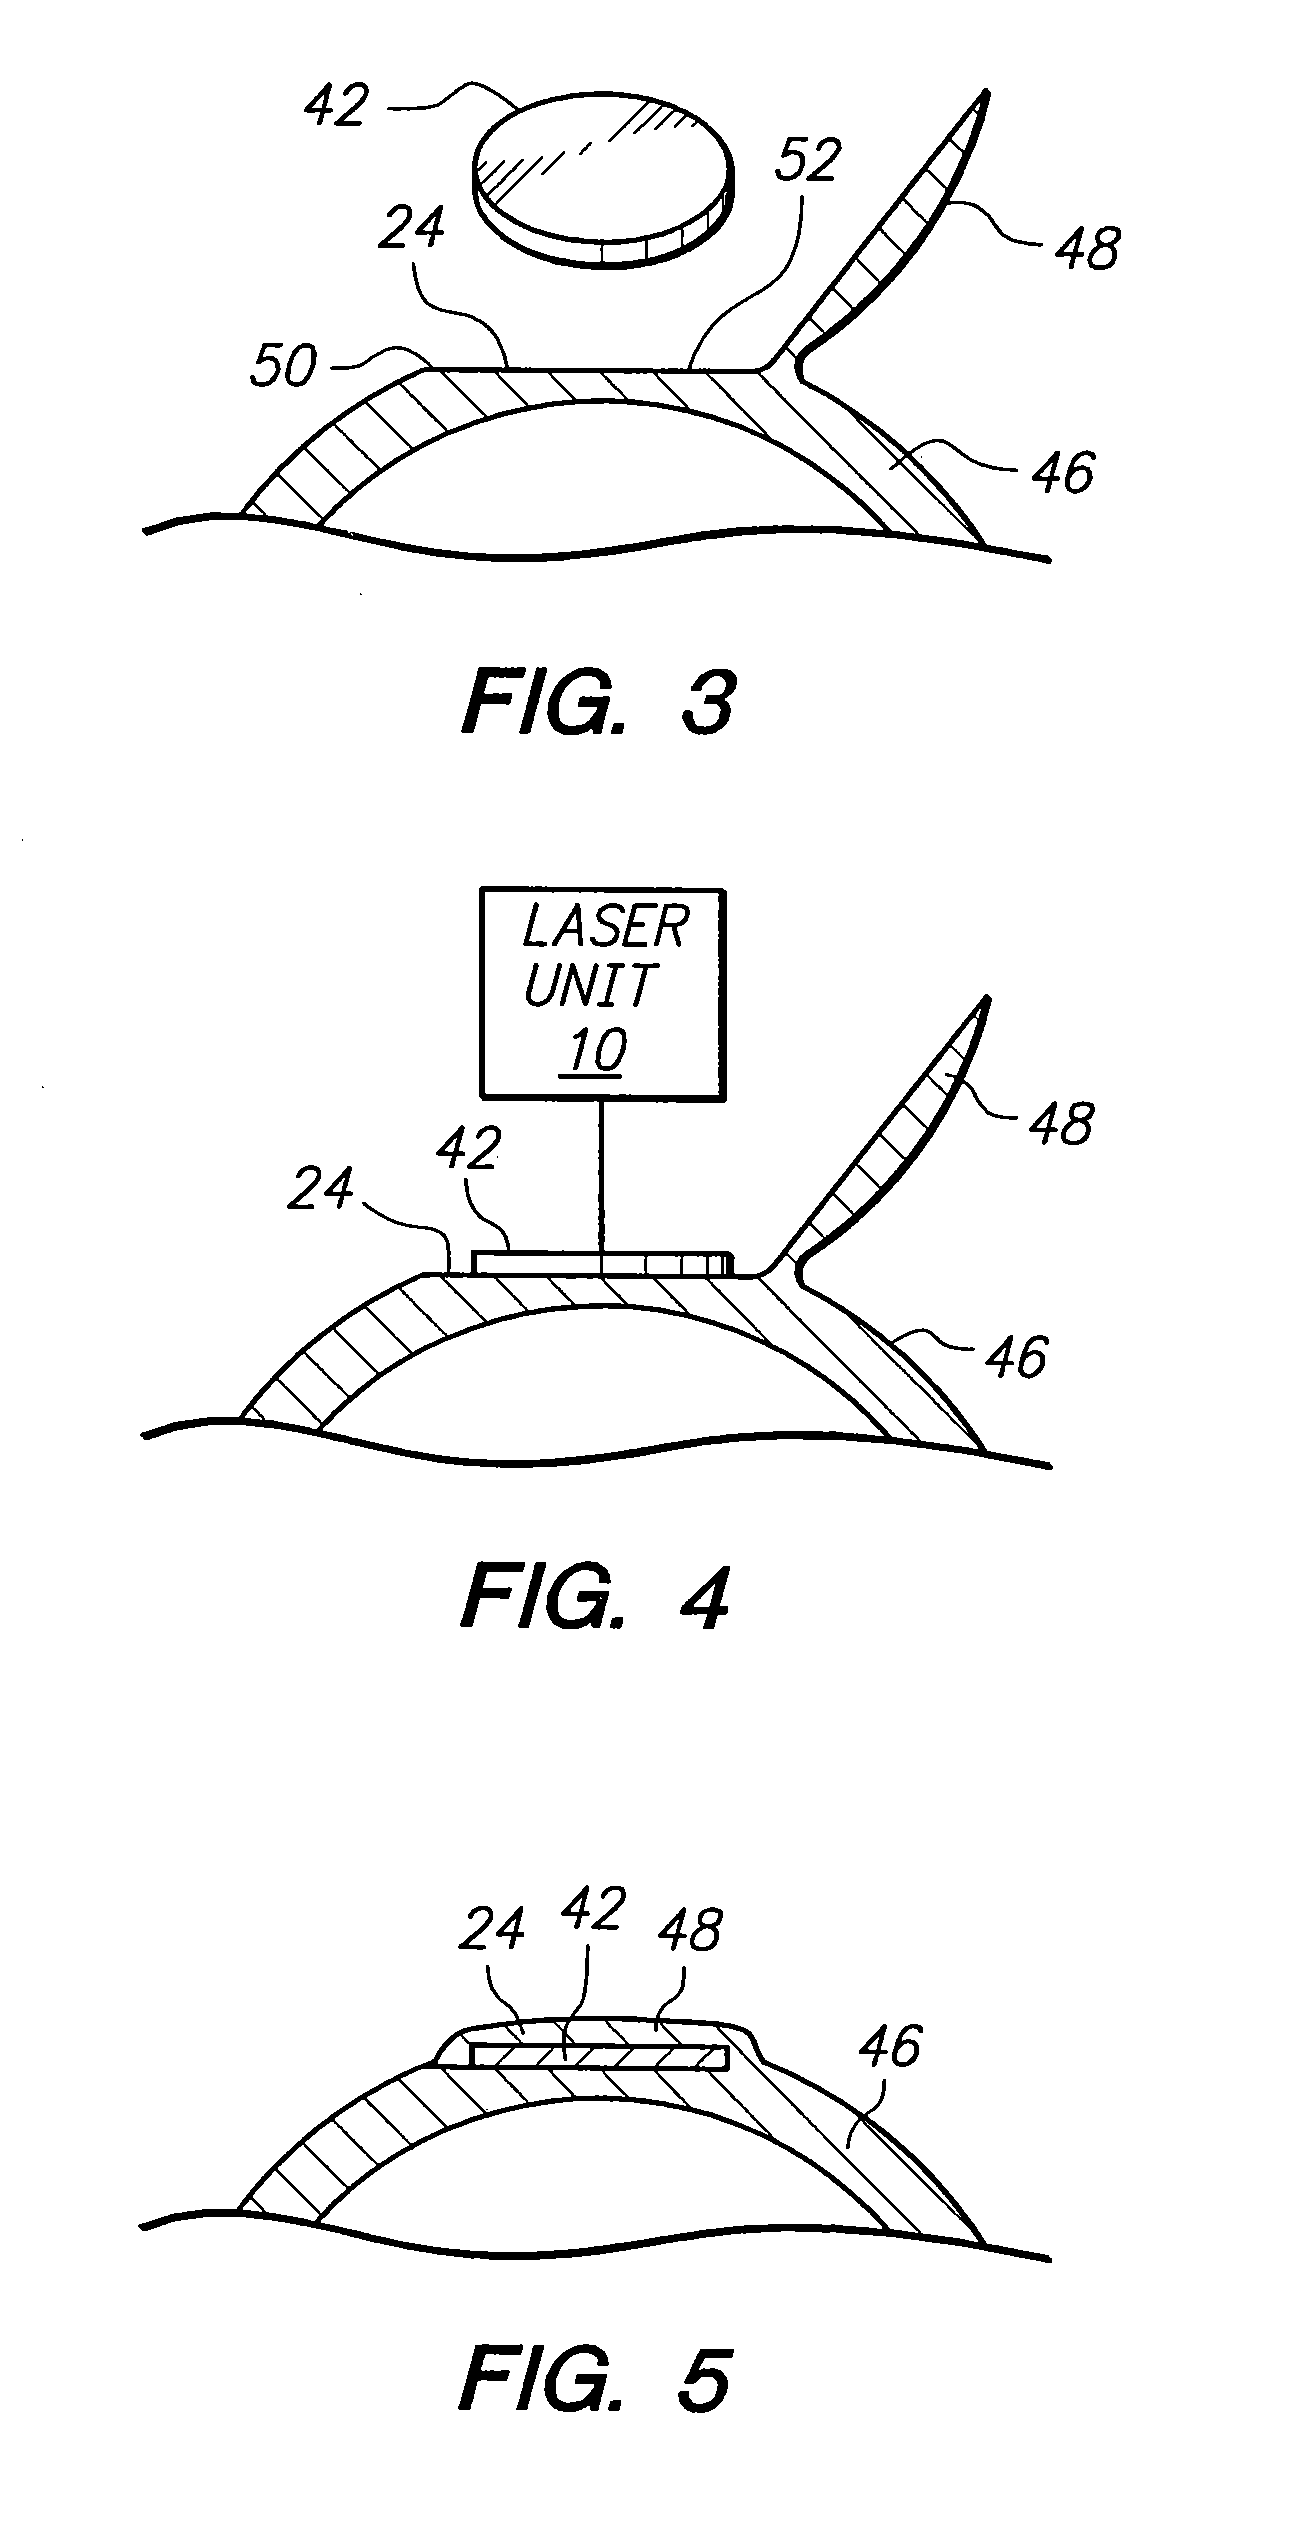 Method for harvesting corneal donor plugs for use in keratophakia procedures